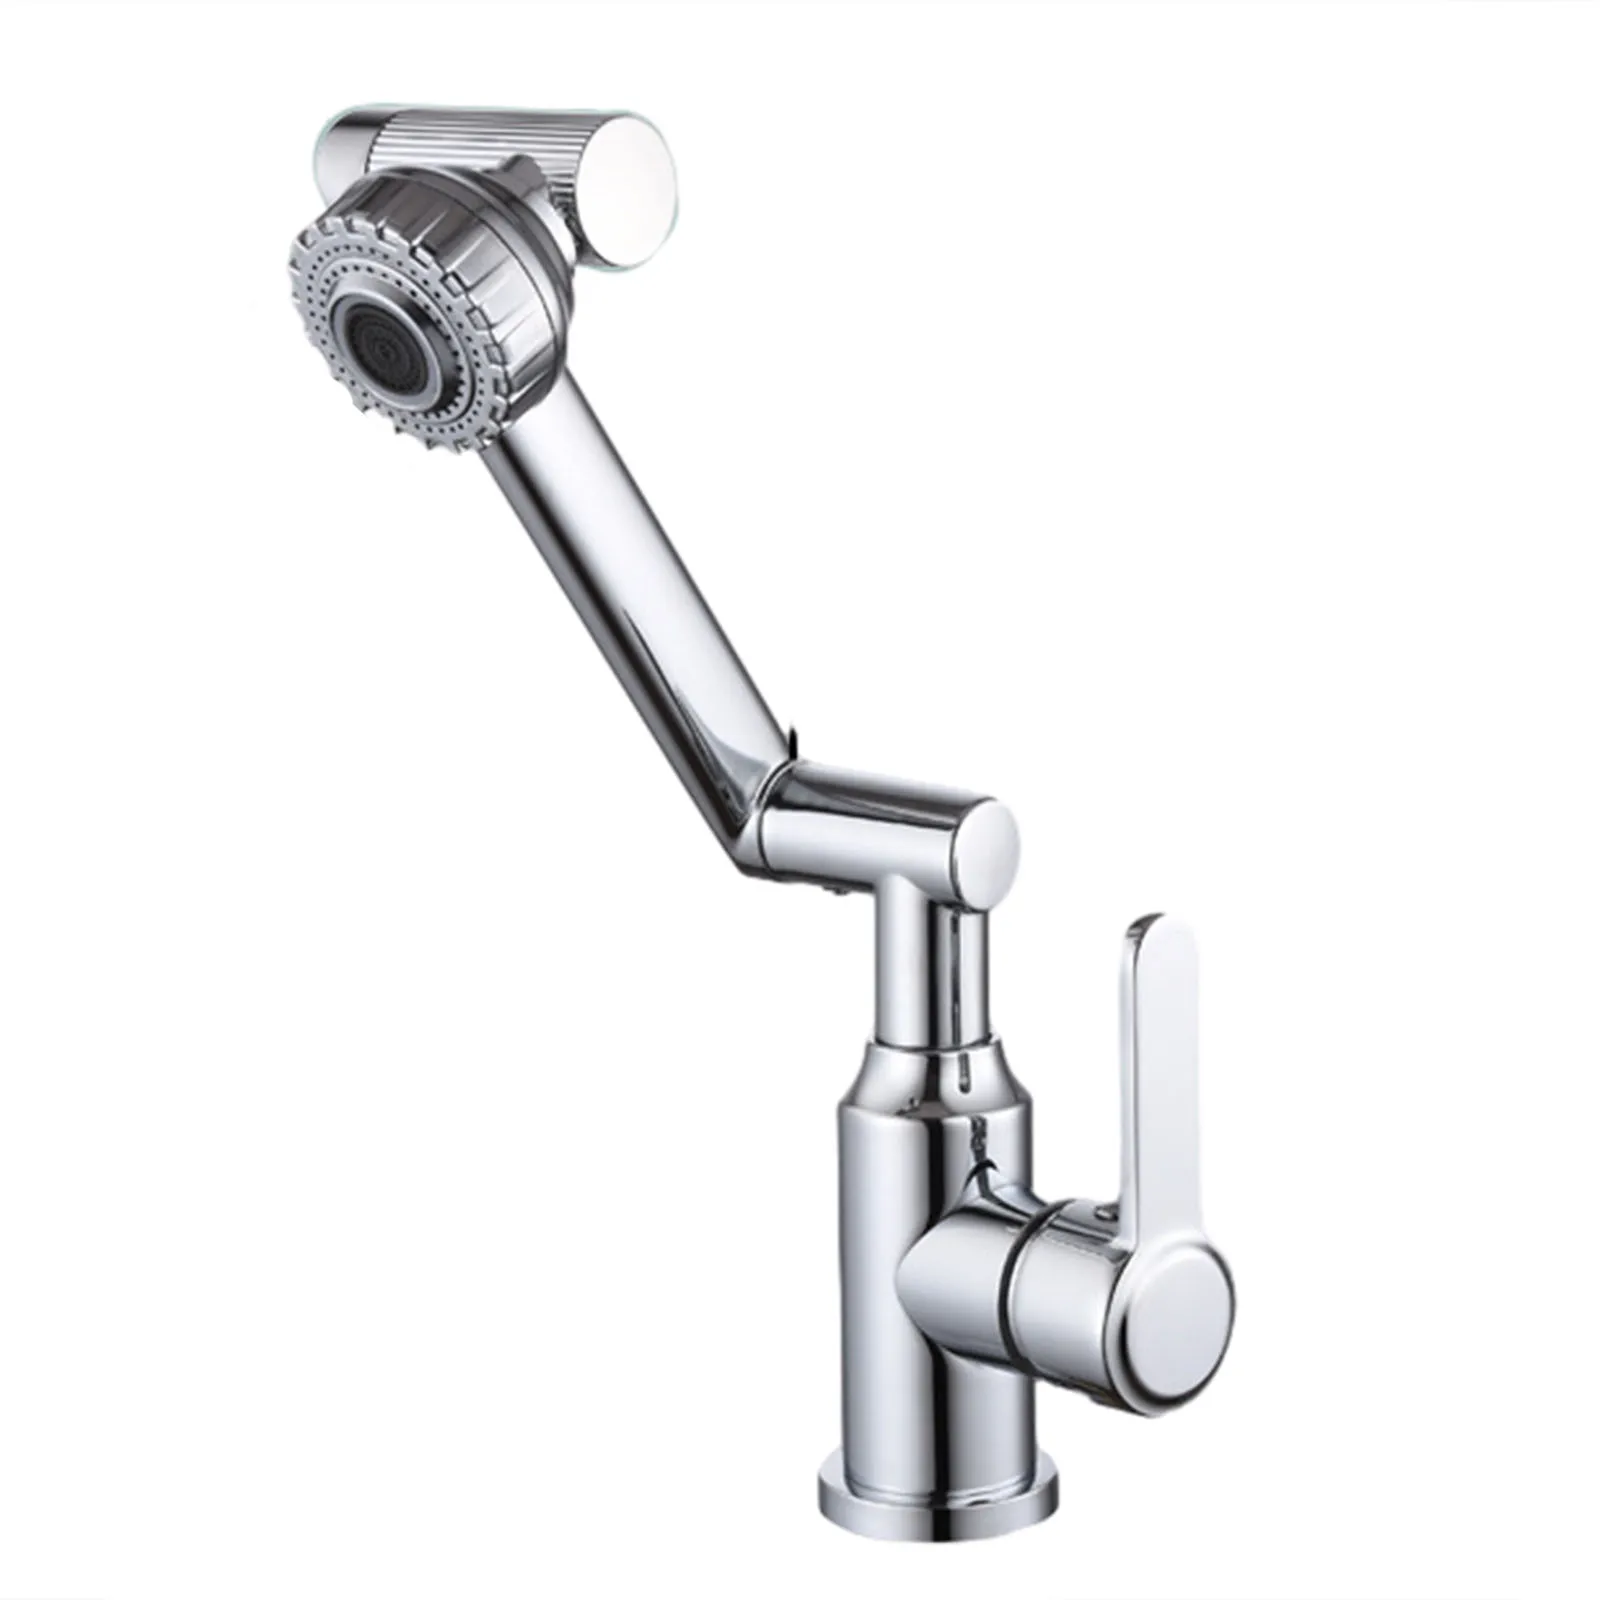 

T 360 Rotation Multi-function Stream Sprayer Hot Cold Water Sink Mixer Wash Tap For Bathroom Basin Fauce Accessories Gourmet